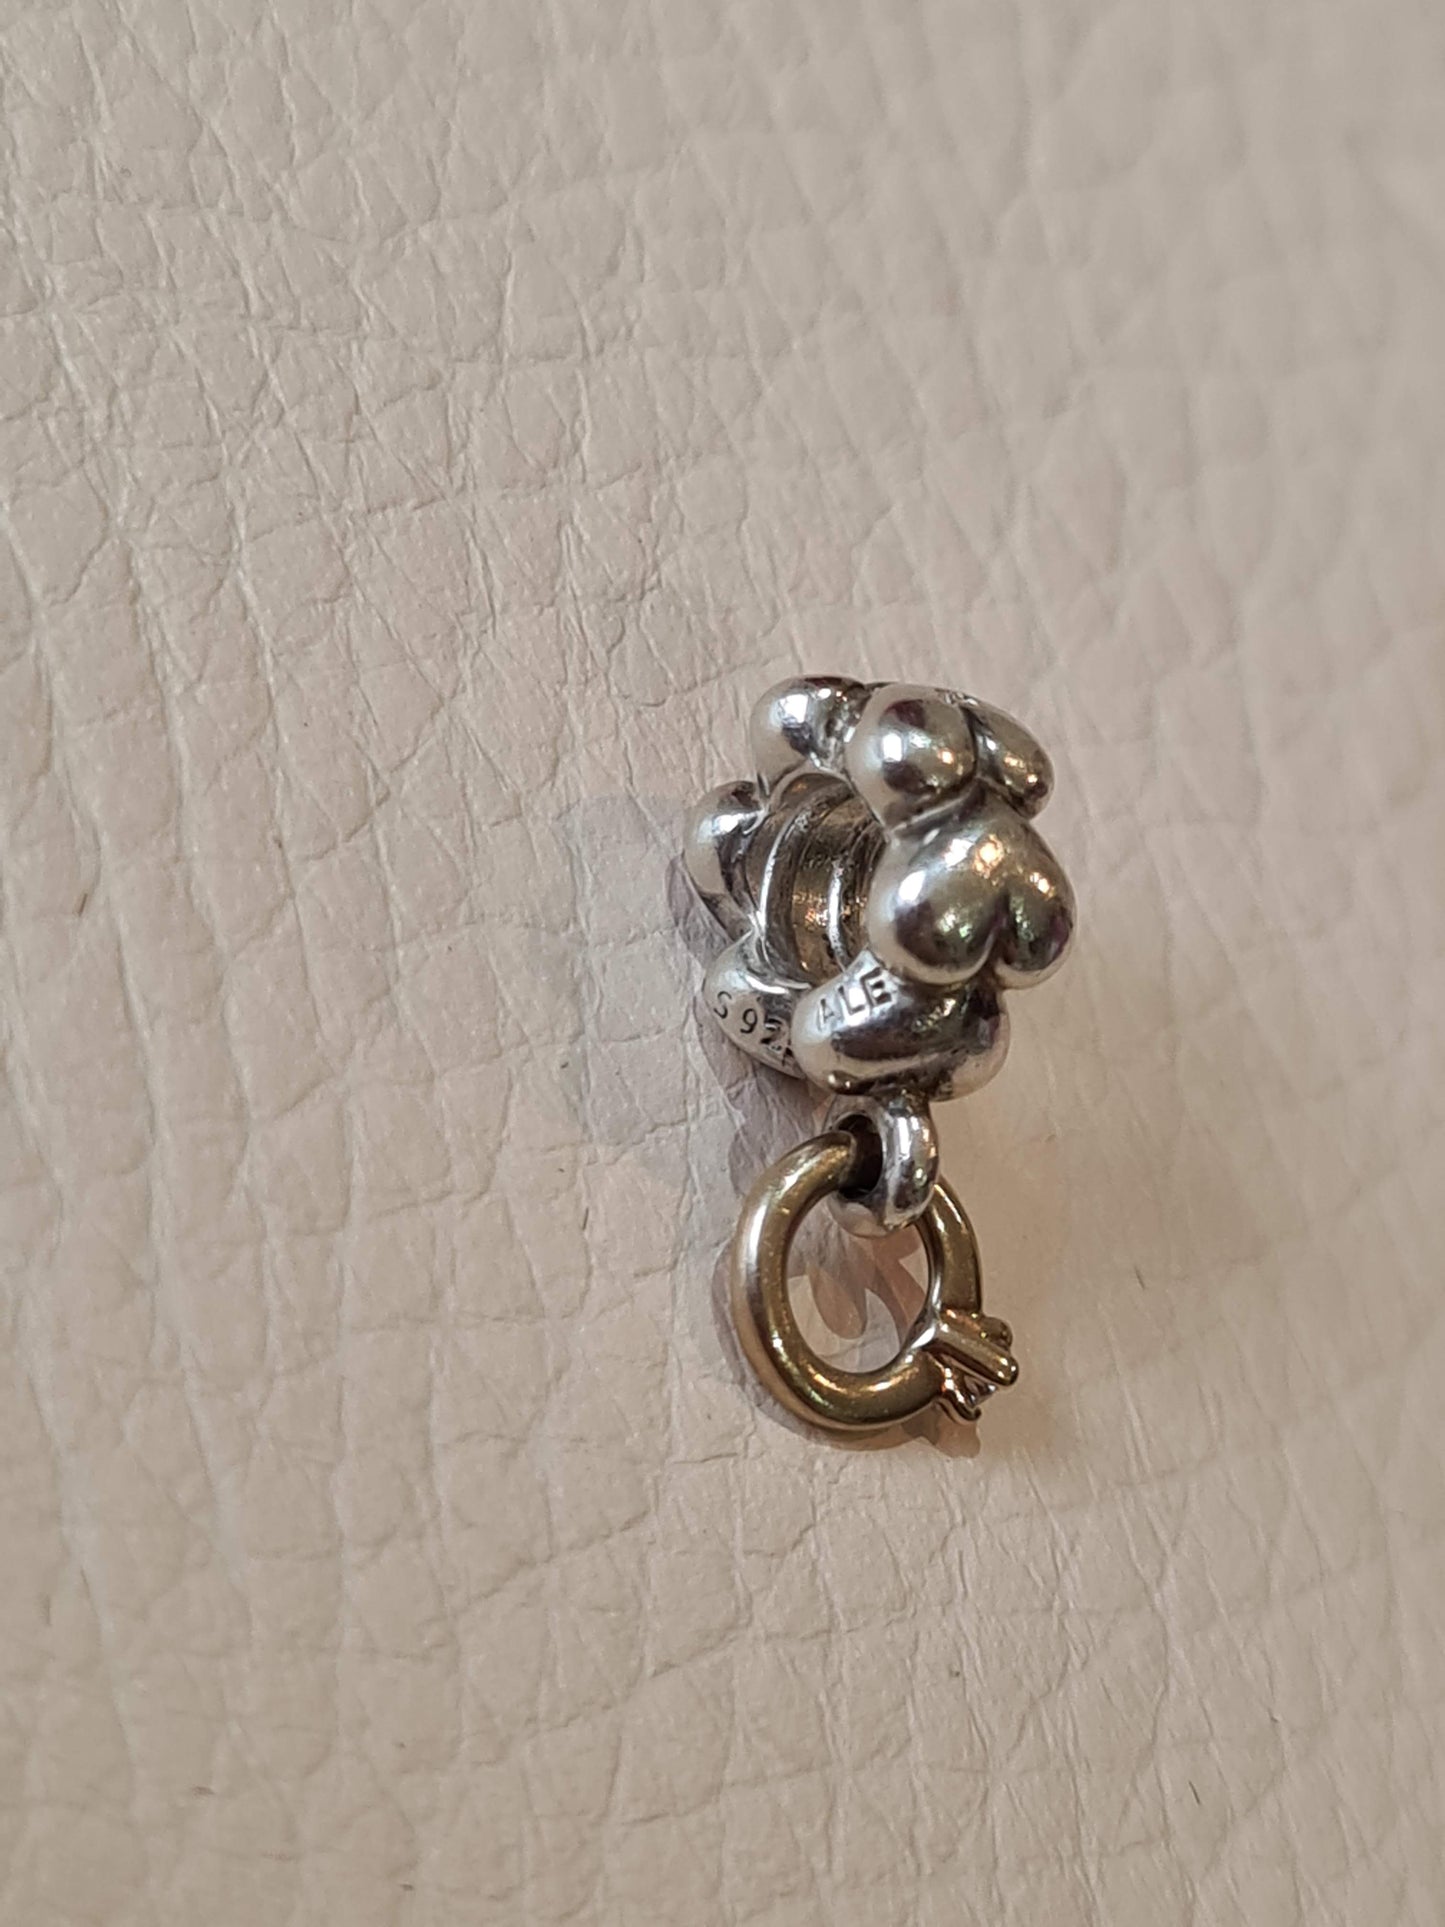 Genuine Pandora 'I Do' Engagement Ring in Gold with Small Diamond Dangle Charm